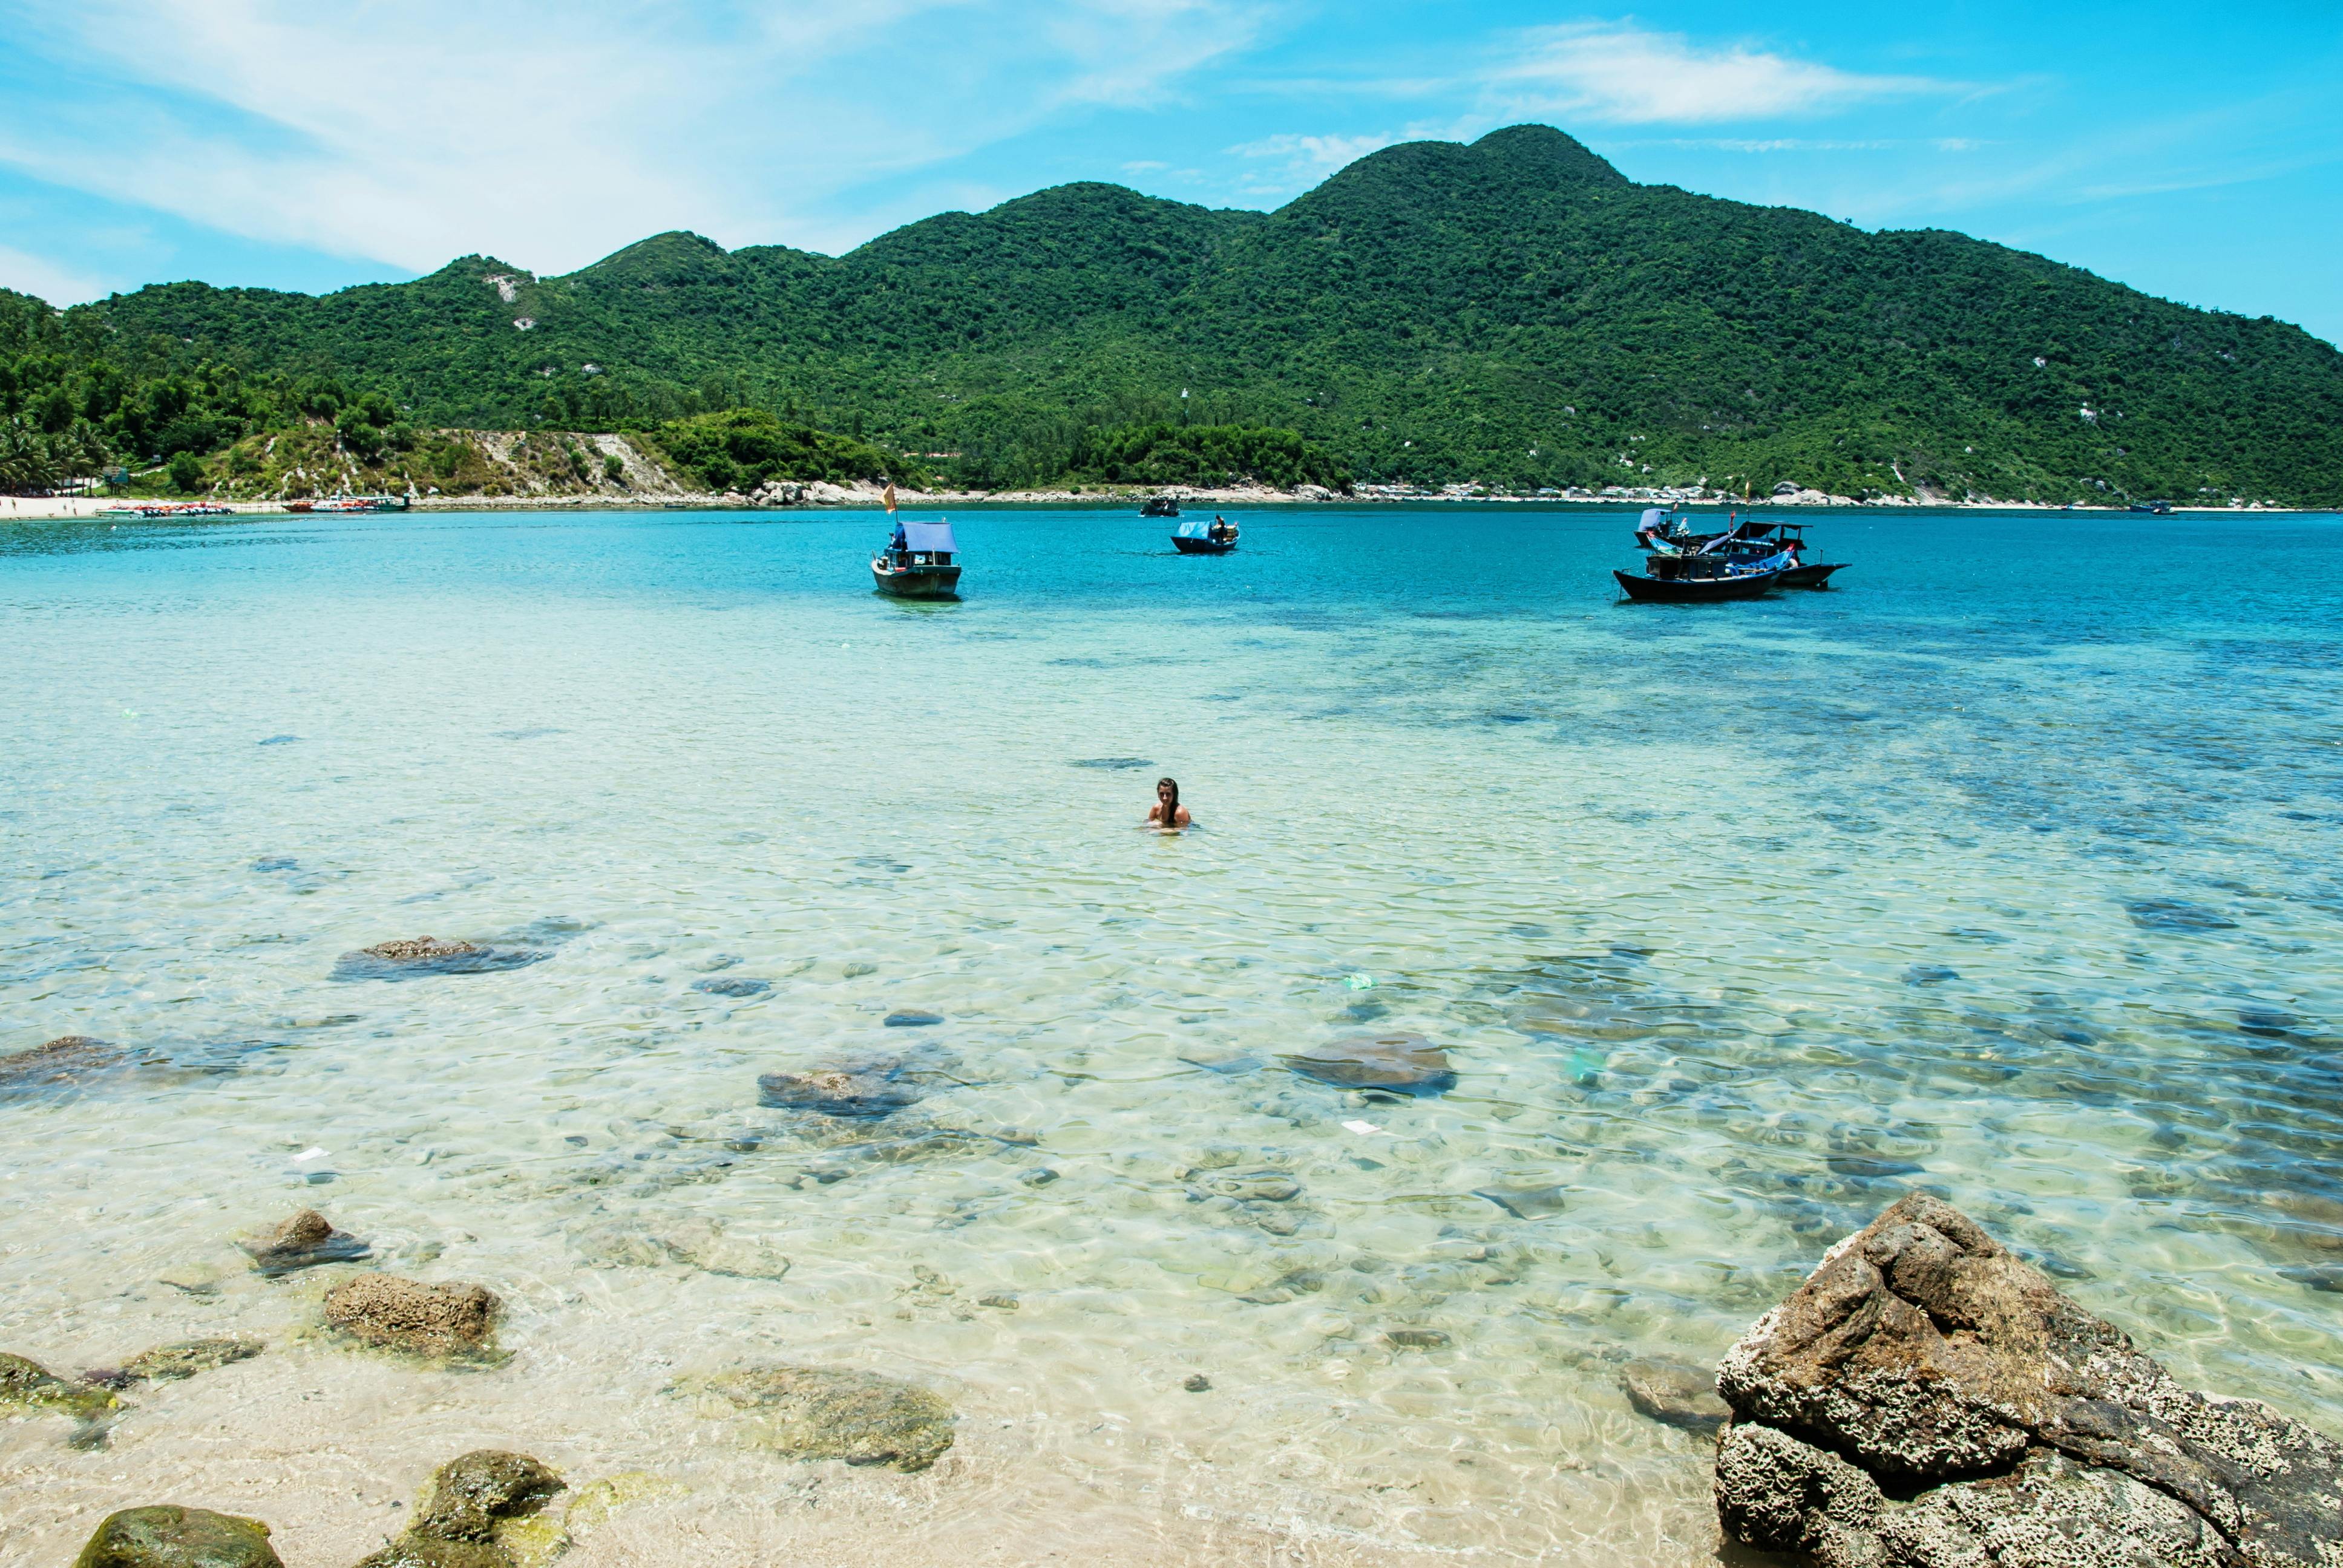 Cham Island discovery tour from Hoi An Musement